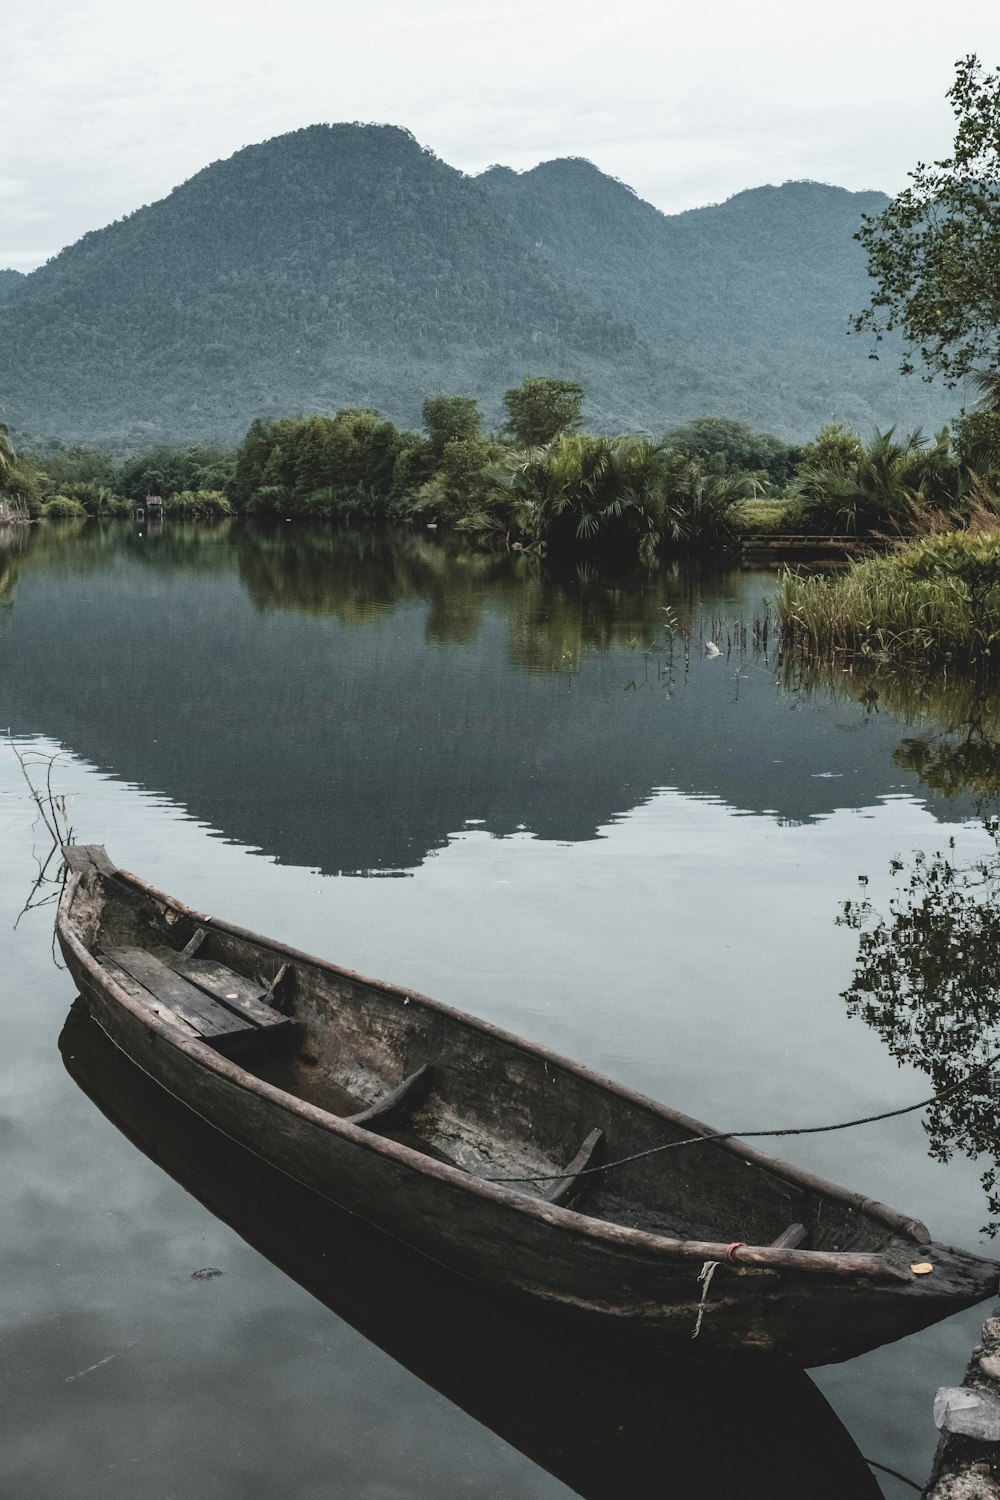 brown canoe on calm body of water near trees